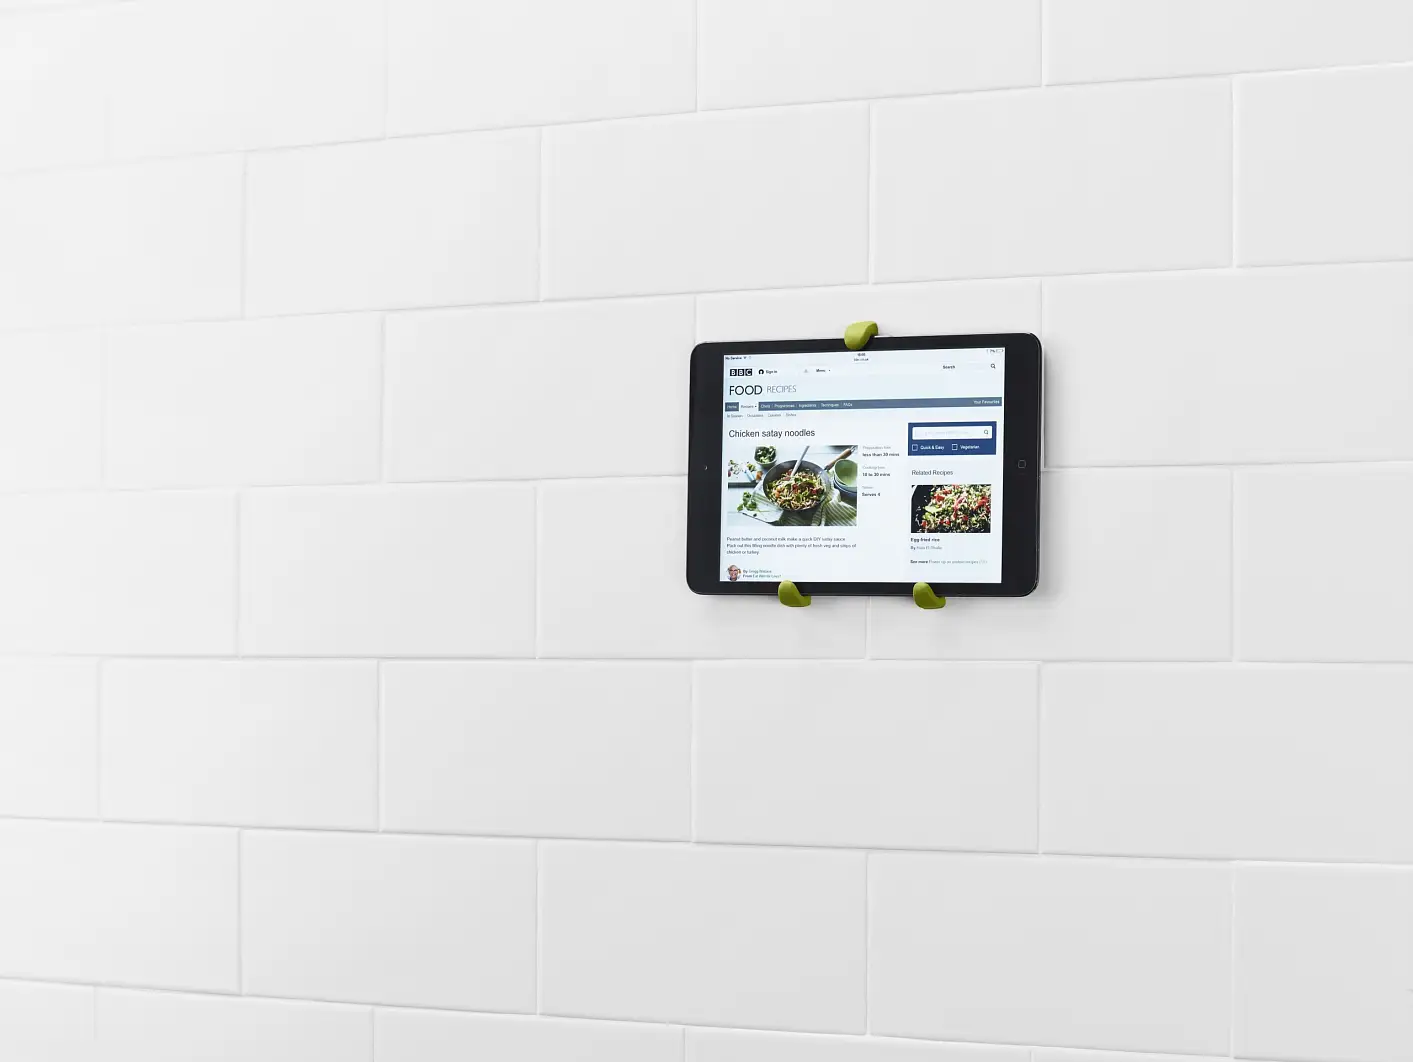 ... or as a wall mount for an iPad.